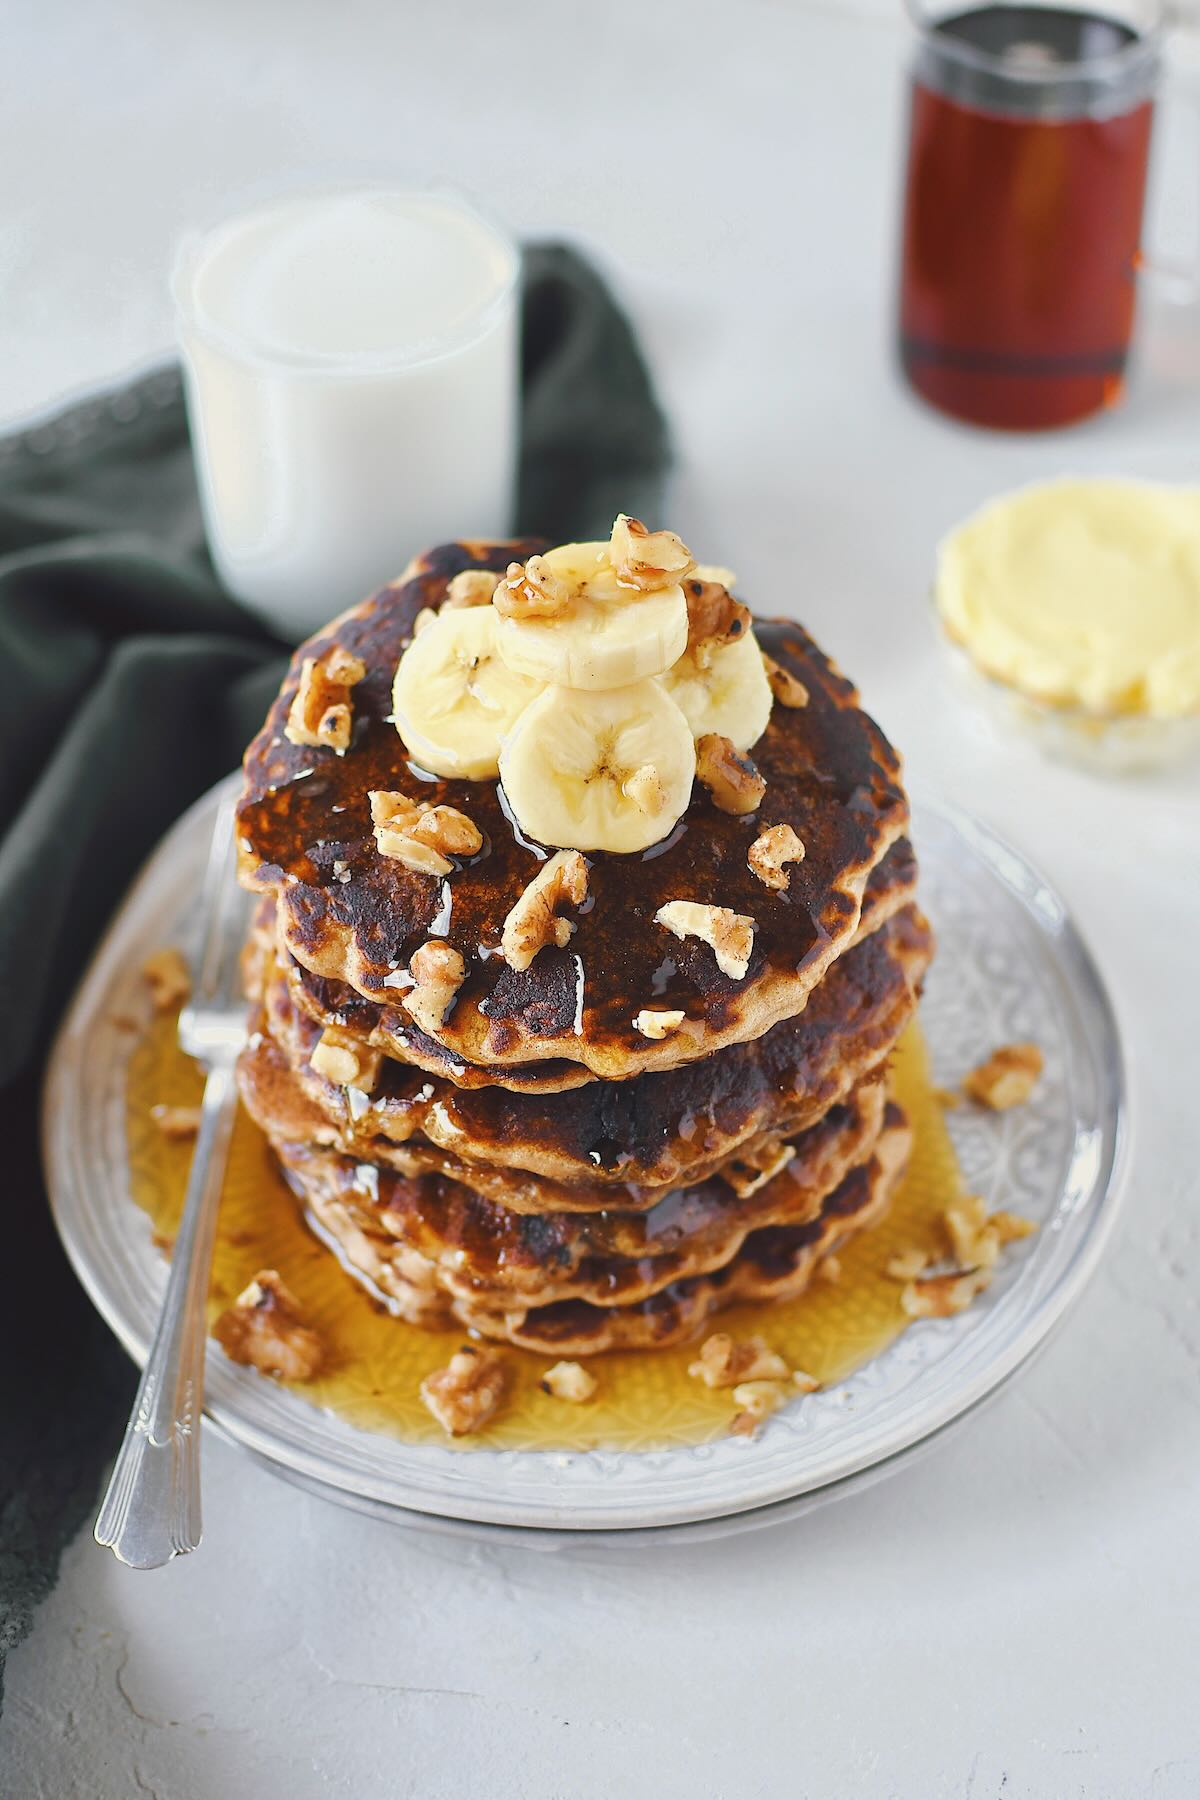 Banana Nut Pancakes stacked high, topped with banana slices and extra mini chocolate chips.